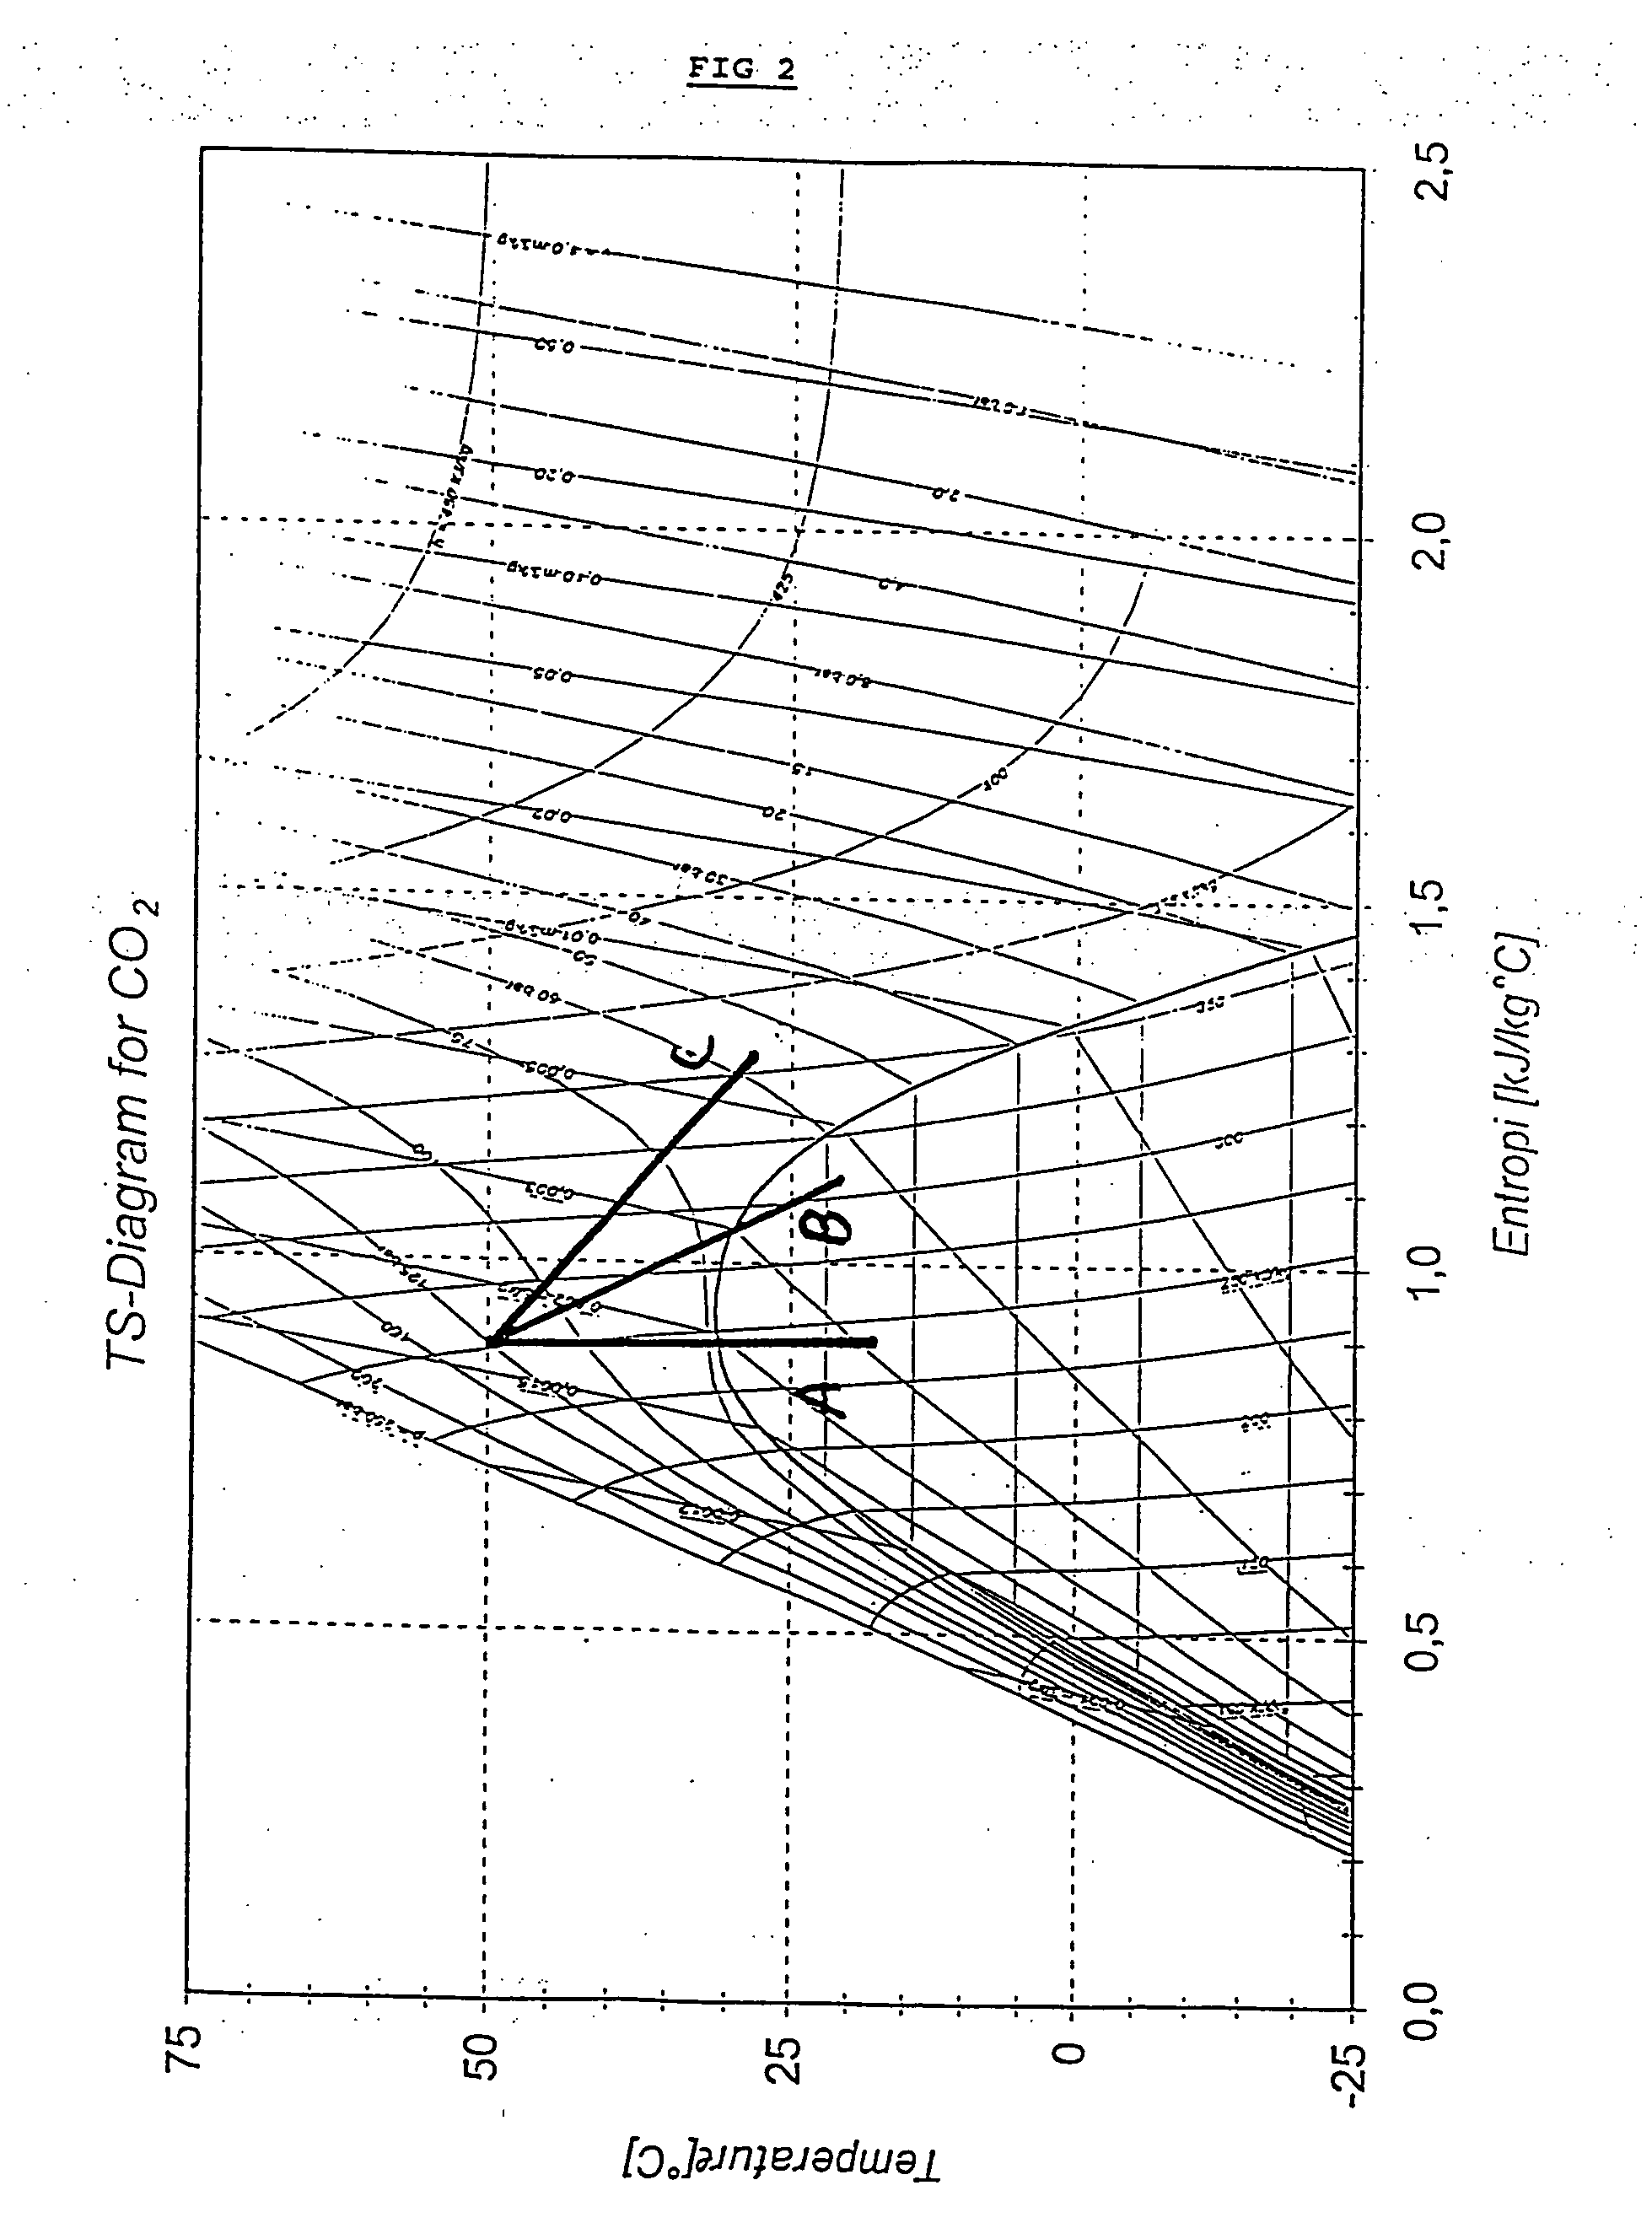 Process for treatment of wood using a carrier fluid under high pressure without damaging the wood